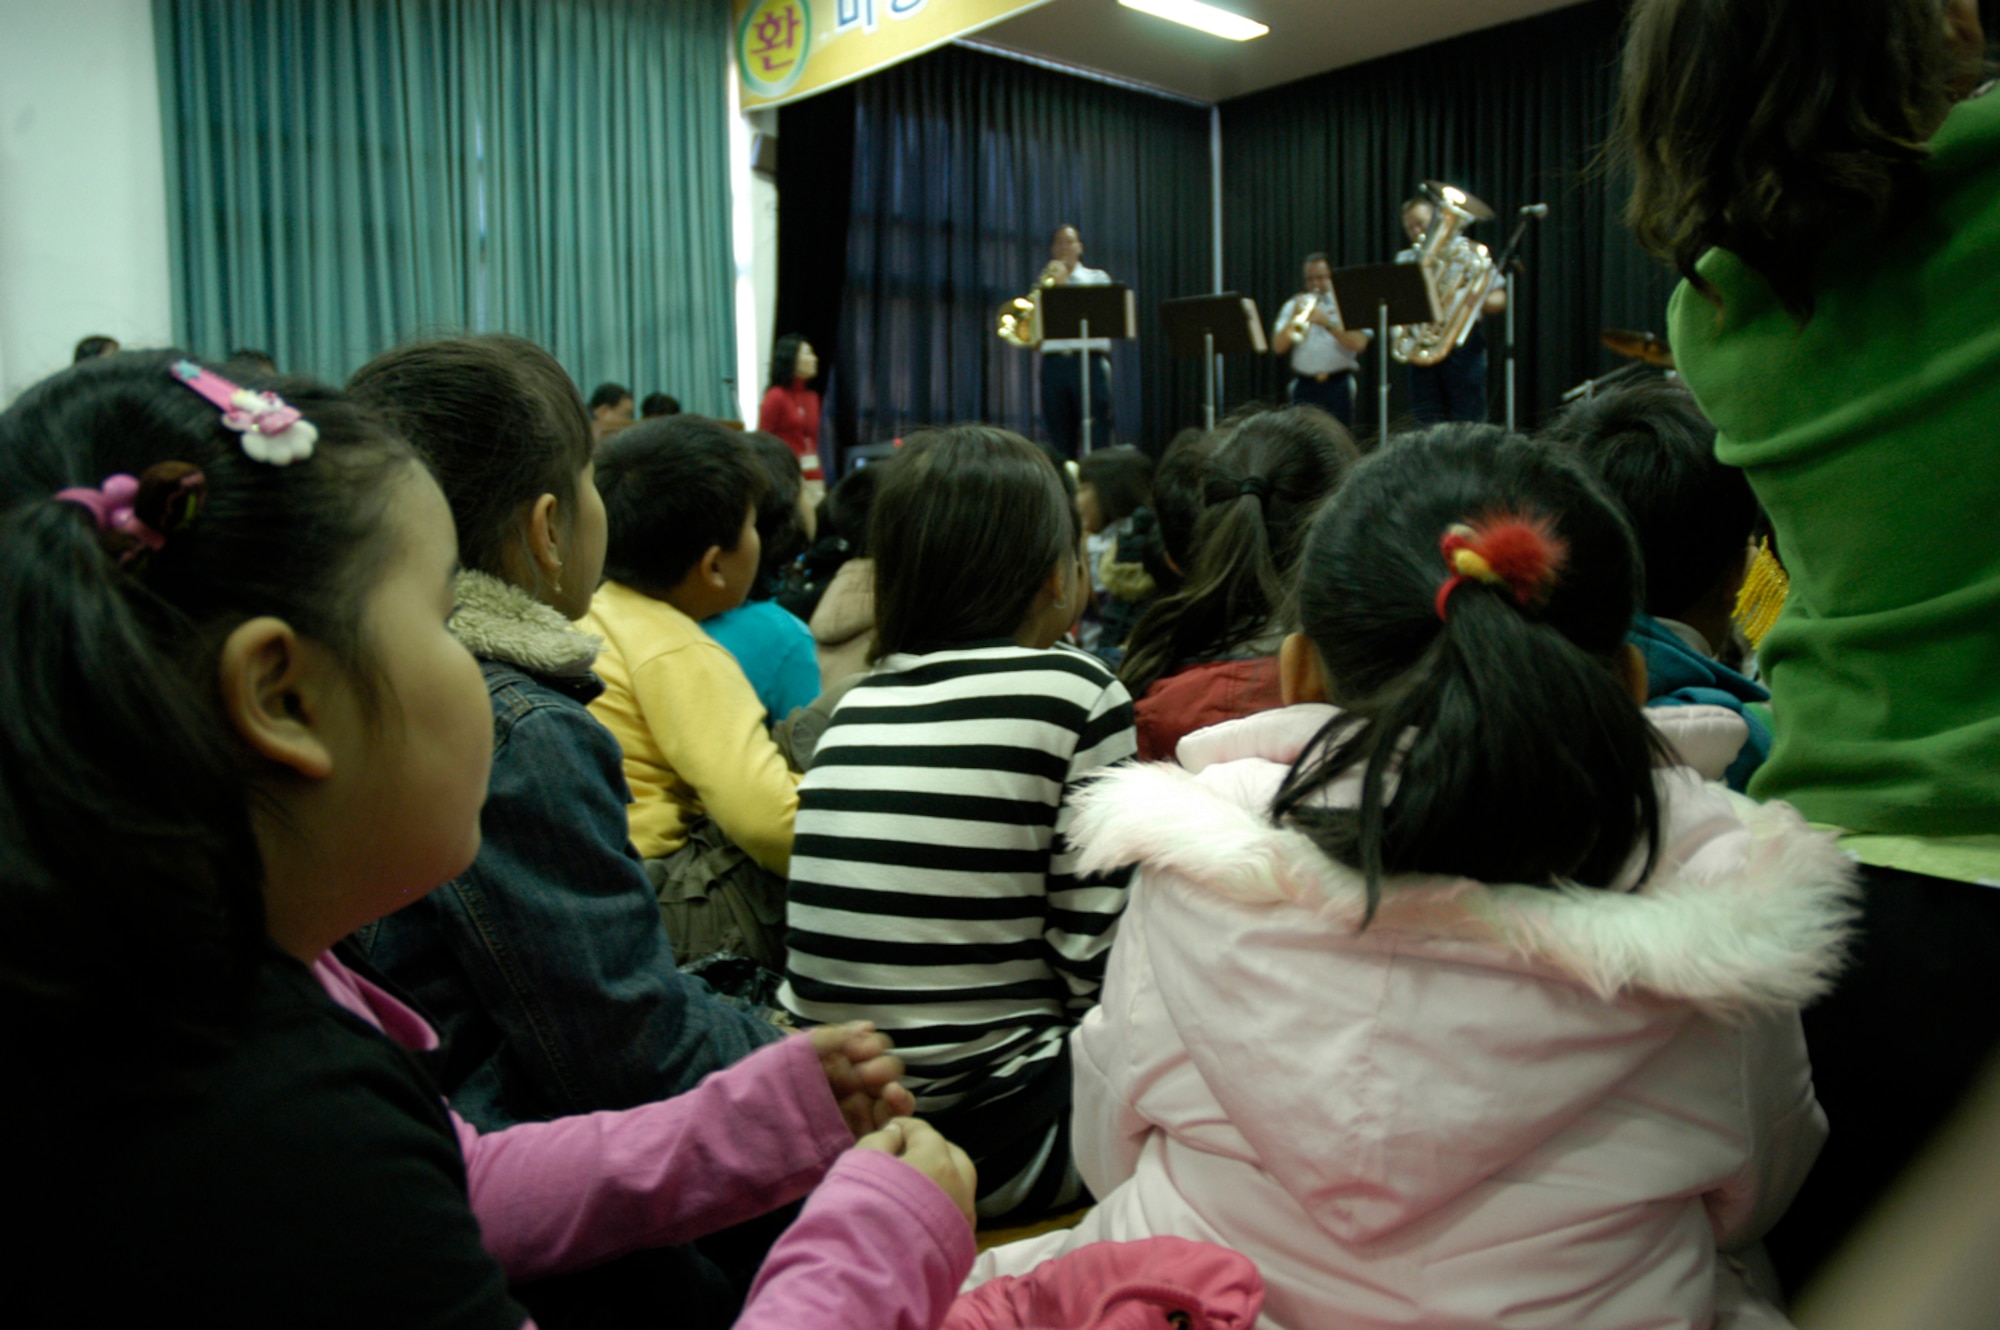 KUNSAN AIR BASE, South Korea -- Students of Na Po Elementary School enjoy the music of the Air Force Band of the Pacific during their performance at the local Gunsan City School Dec. 5. The Elmendorf Air Force Base, Alaska based band performed for more than 300 students, parents and teachers as part of their civic outreach and the base's Good Neighbor Program. (U.S. Air Force Photo/Master Sgt. Sean P. Houlihan)